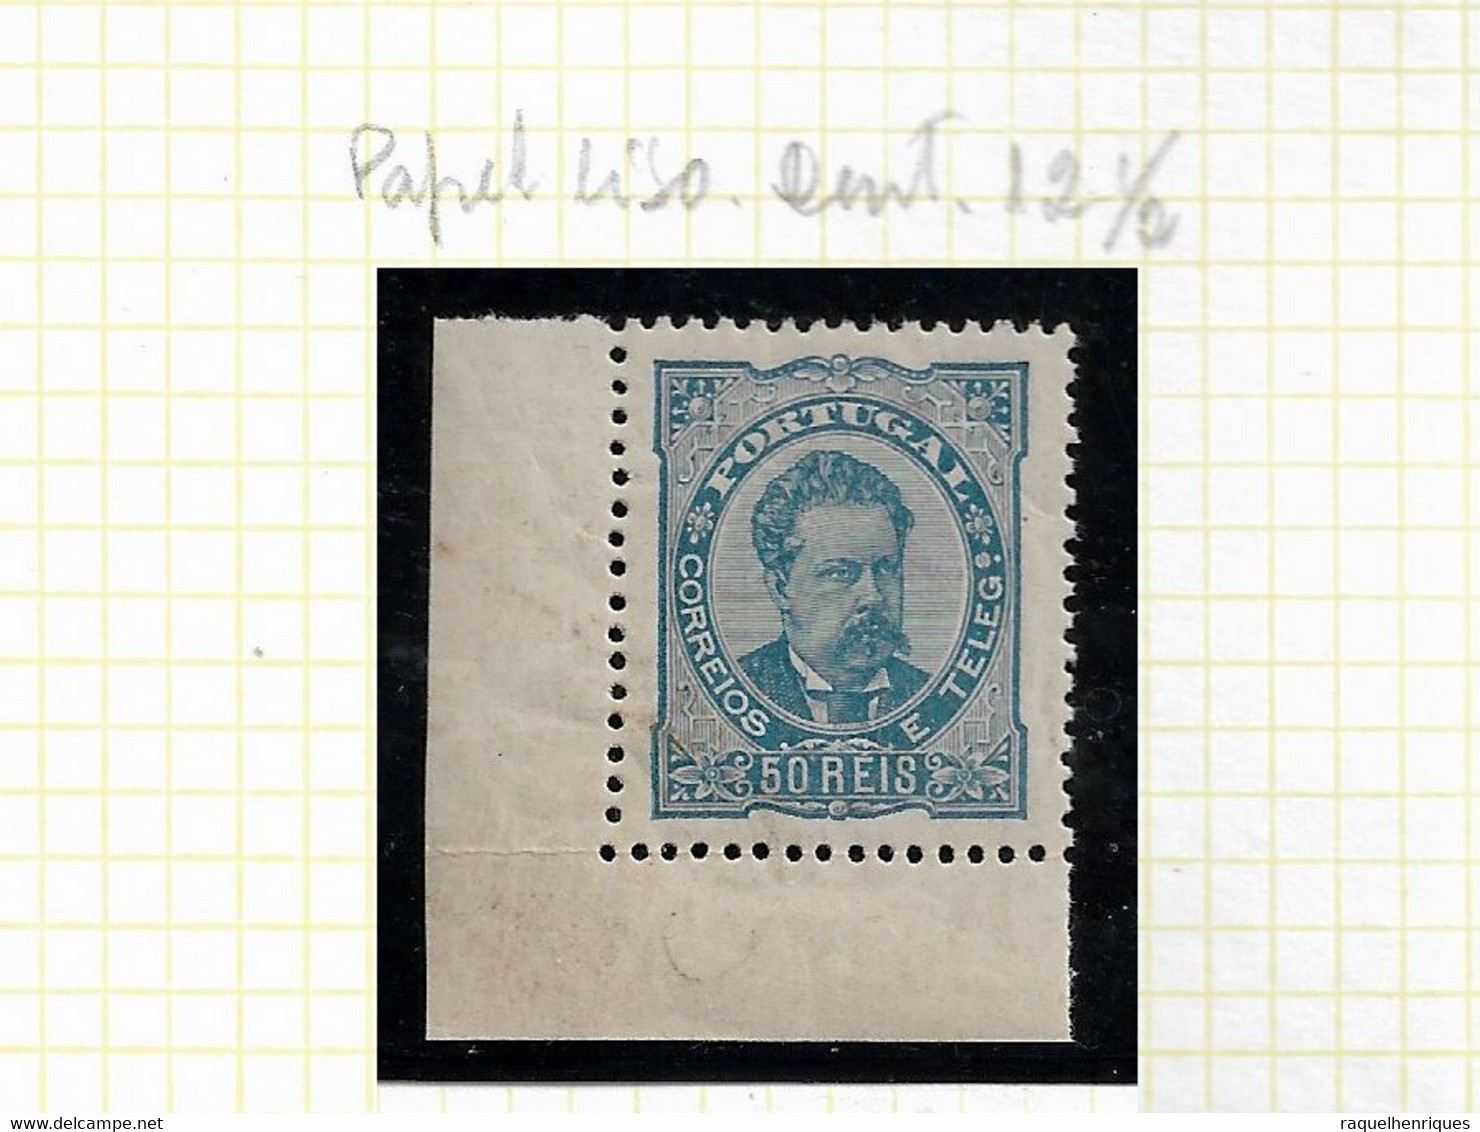 PORTUGAL STAMP - 1882-83 D.LUIS I P.LISO Perf: 12½ Md#58c MNH (LPT1#183) - Unused Stamps